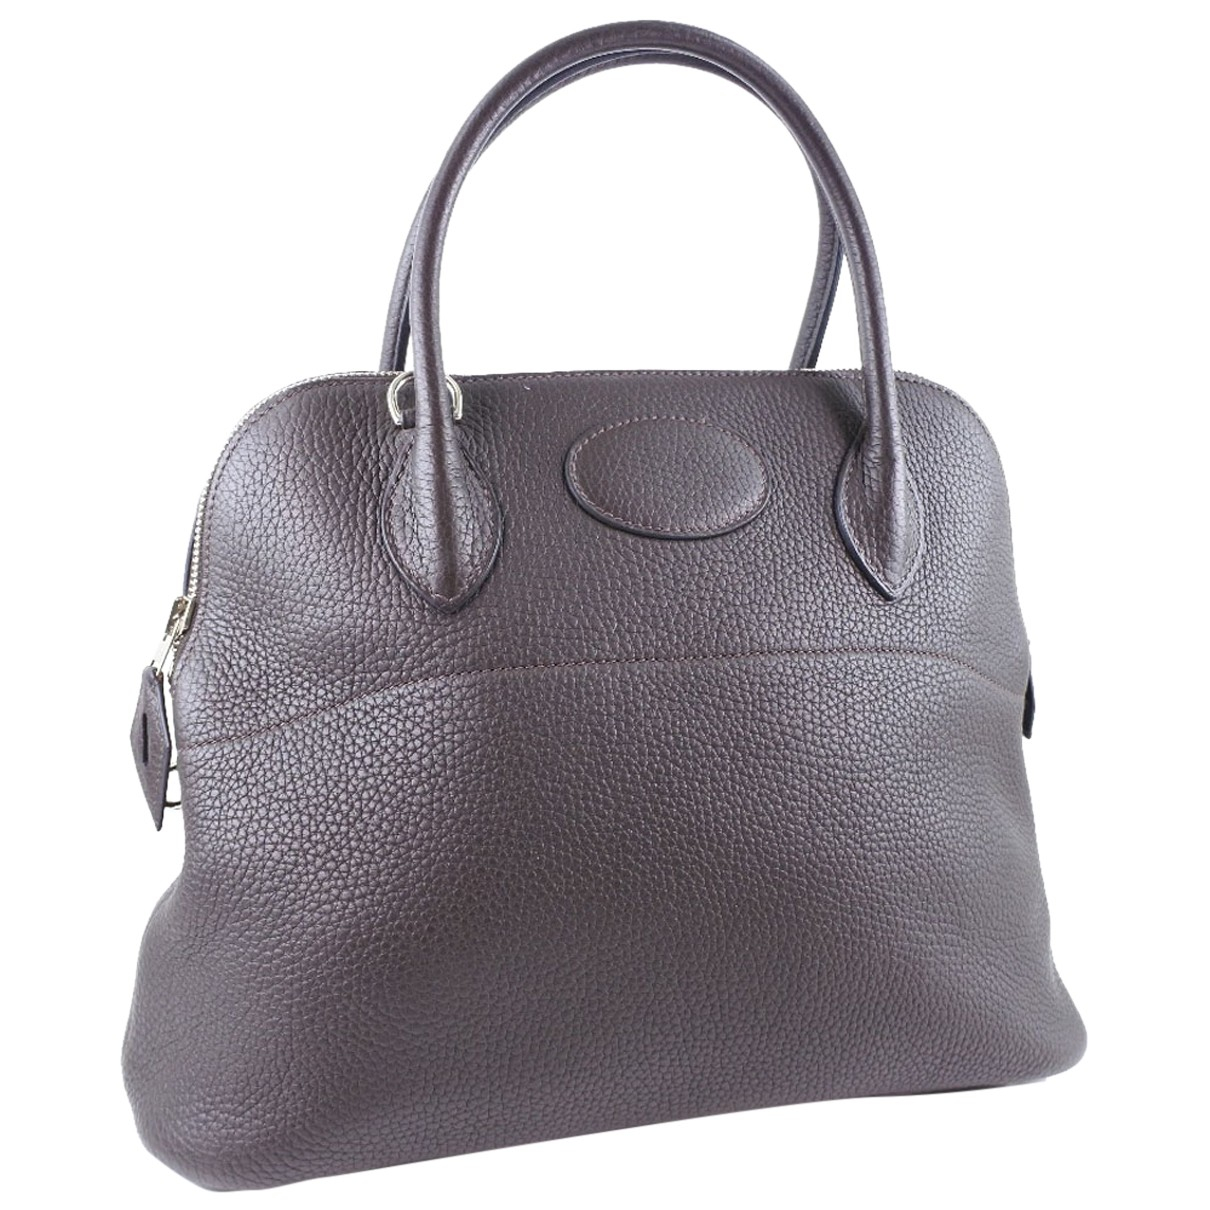 Max 44% OFF Cheap mail order shopping Bolide leather handbag